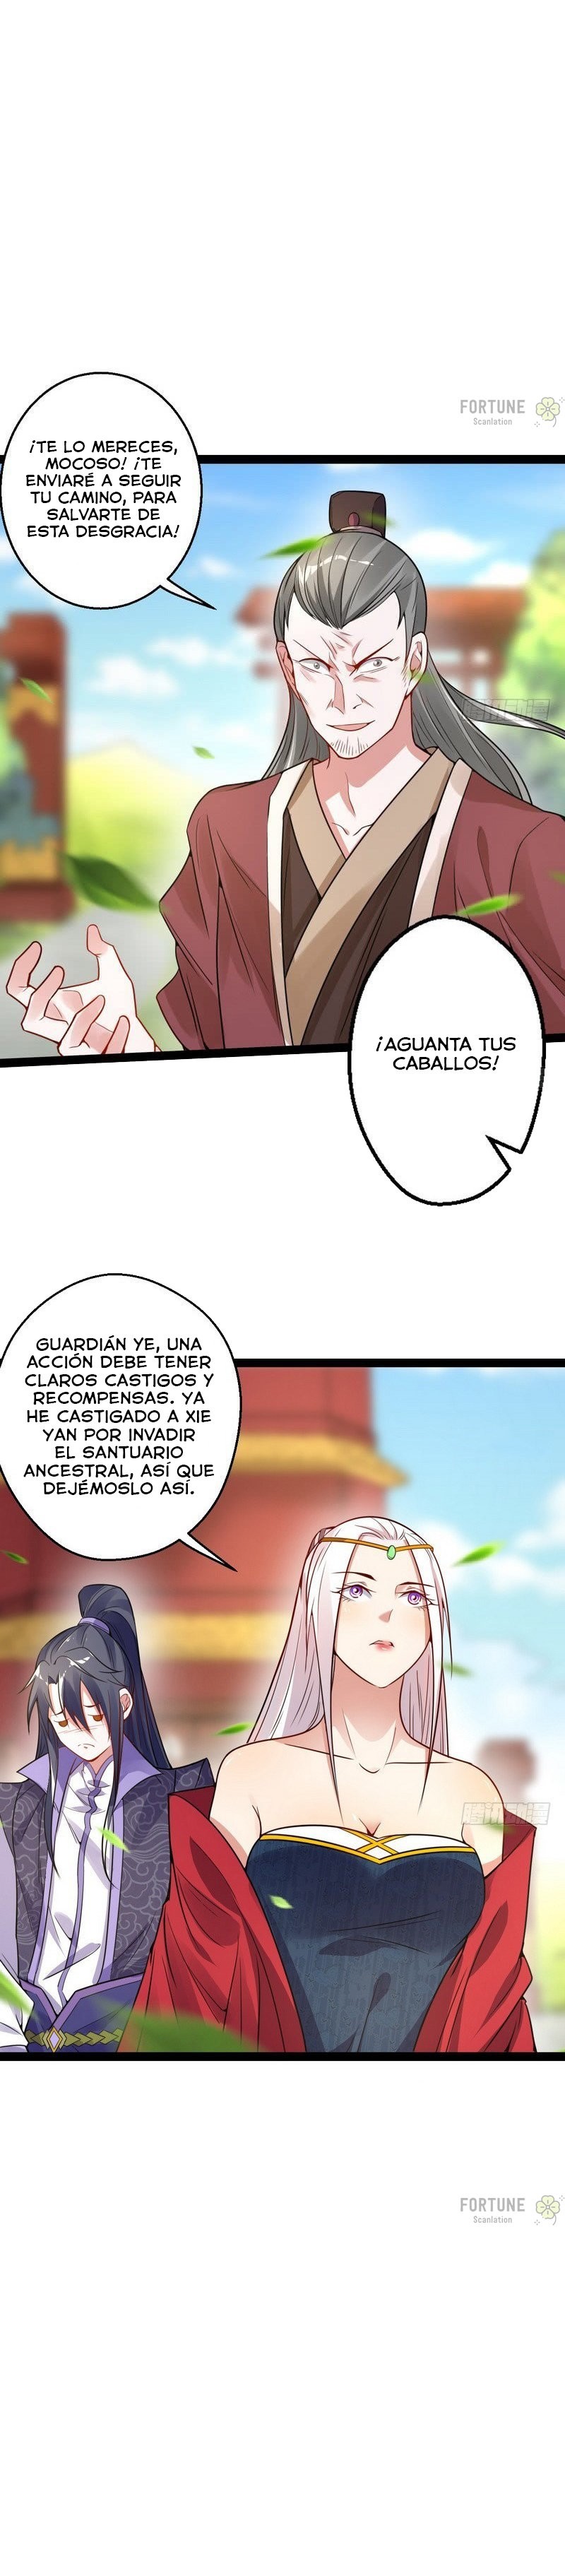 Manga Soy un dios maligno Chapter 9 image number 23